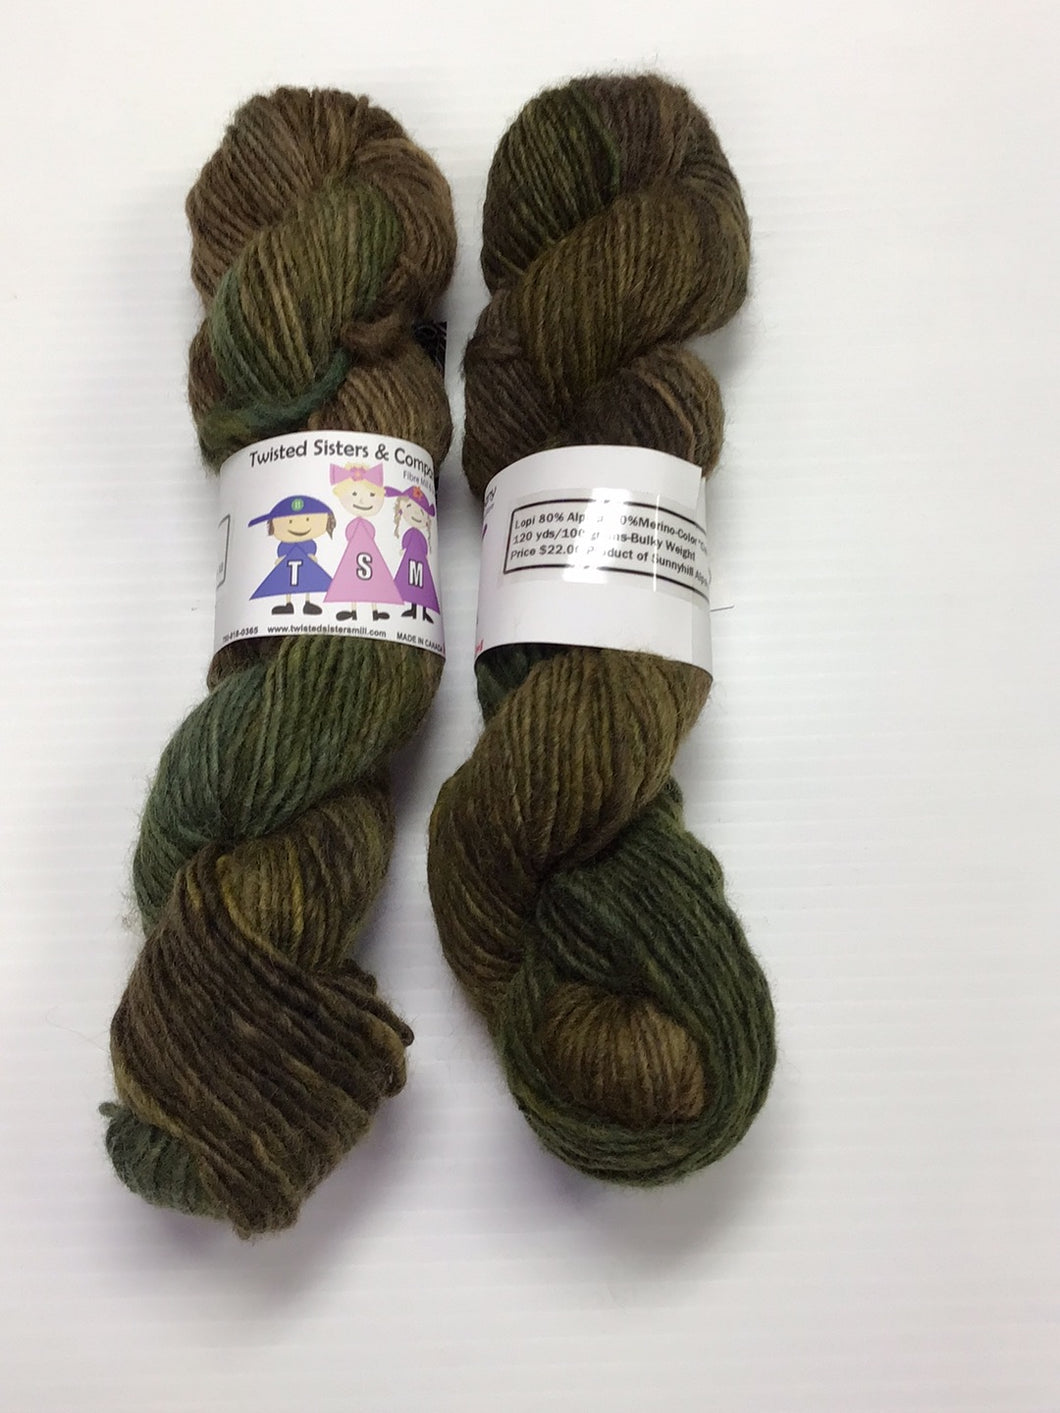 Lopi Yarn - Hand Dyed Alpaca Blend by Twisted Sisters